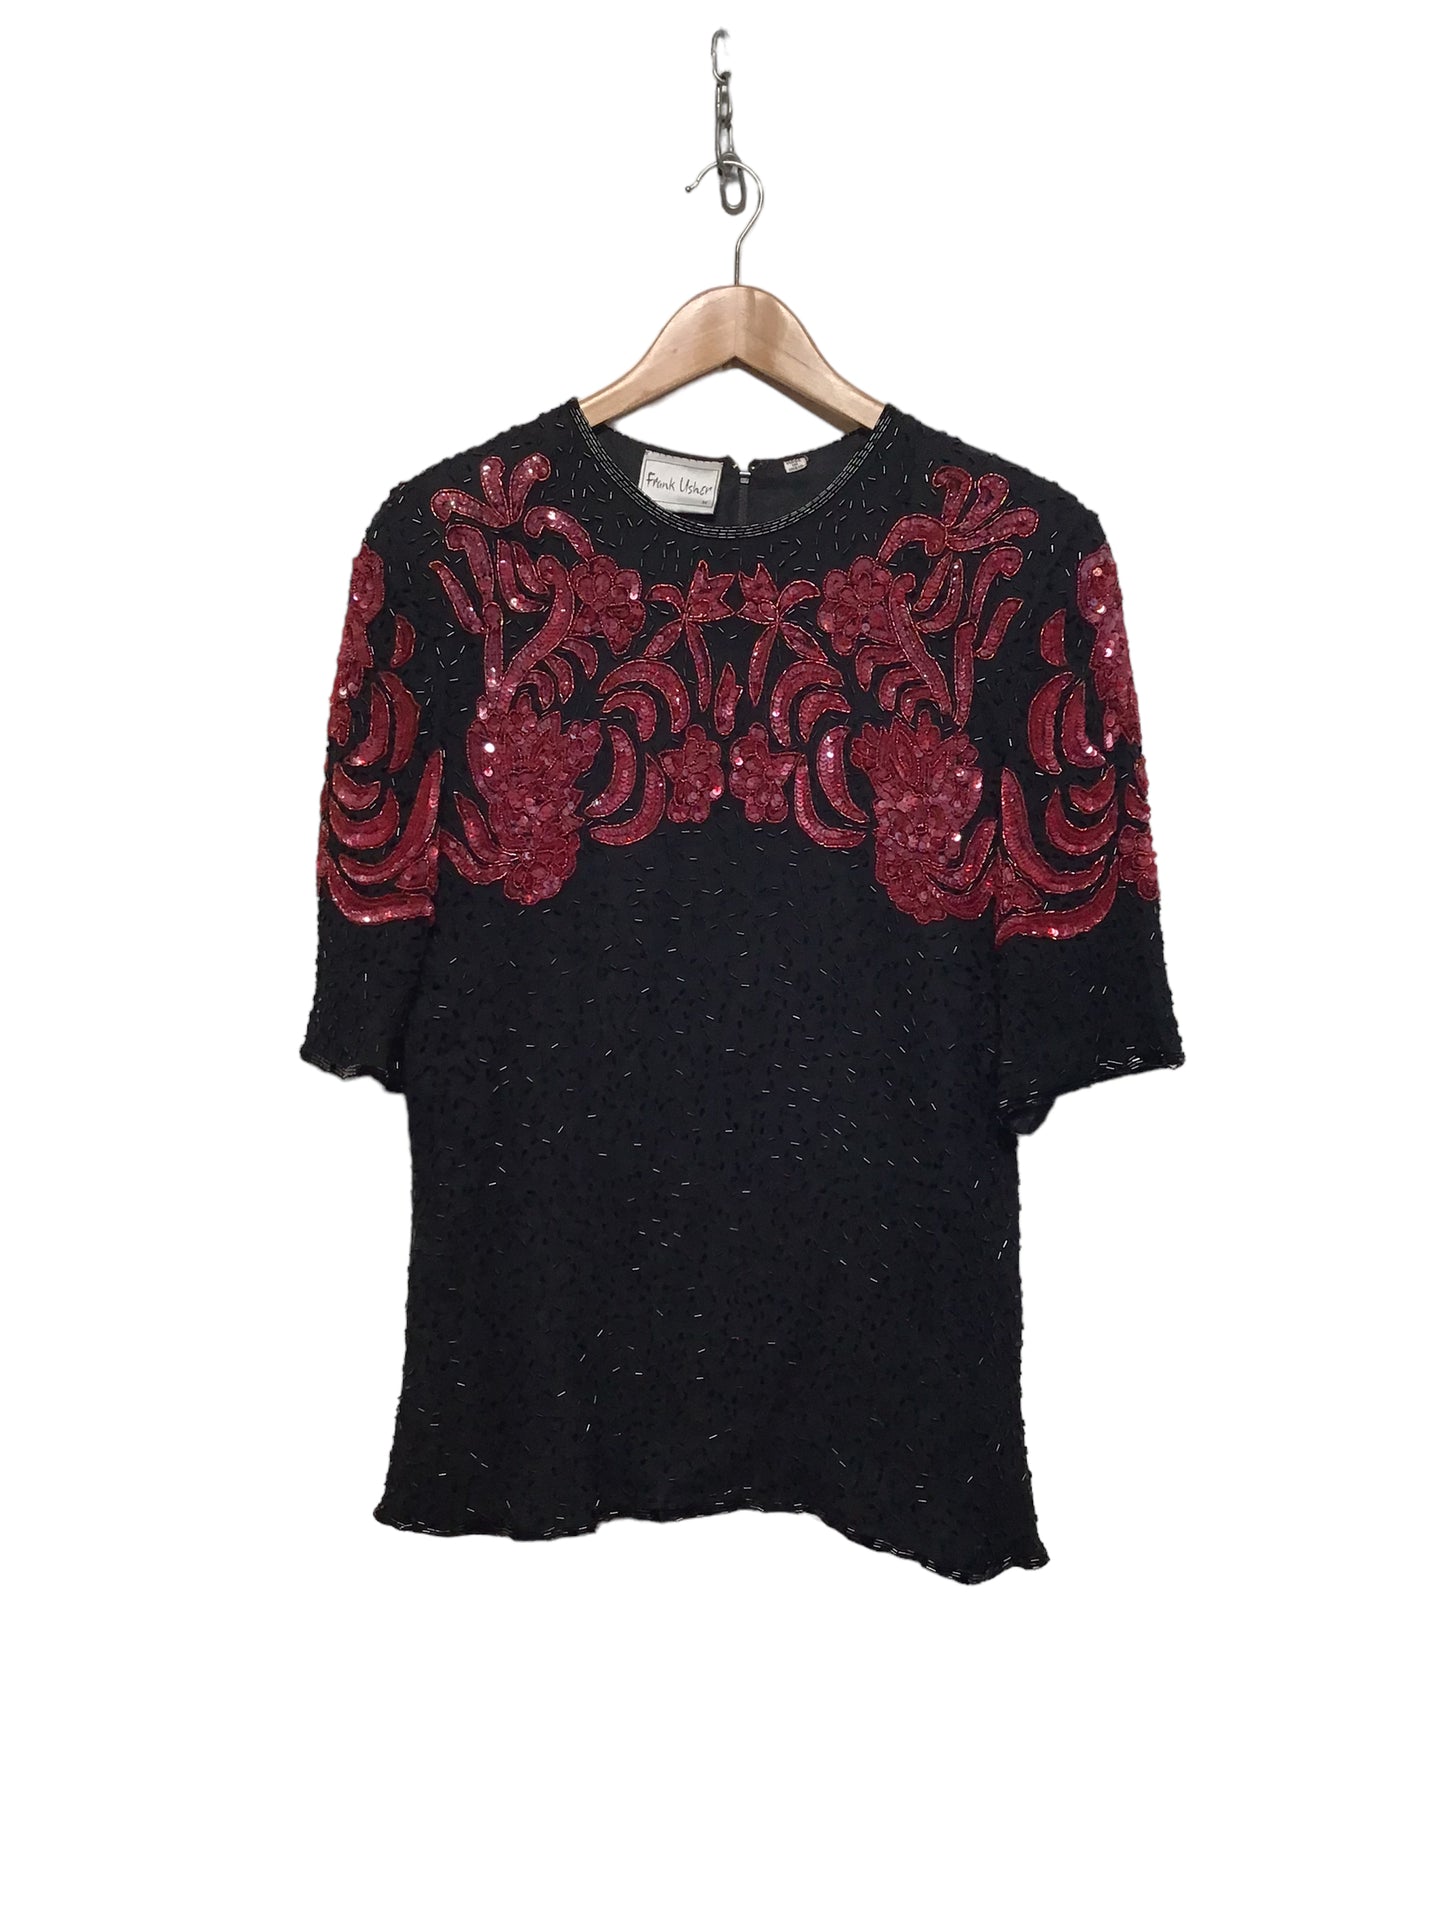 Beaded Top (Size M)